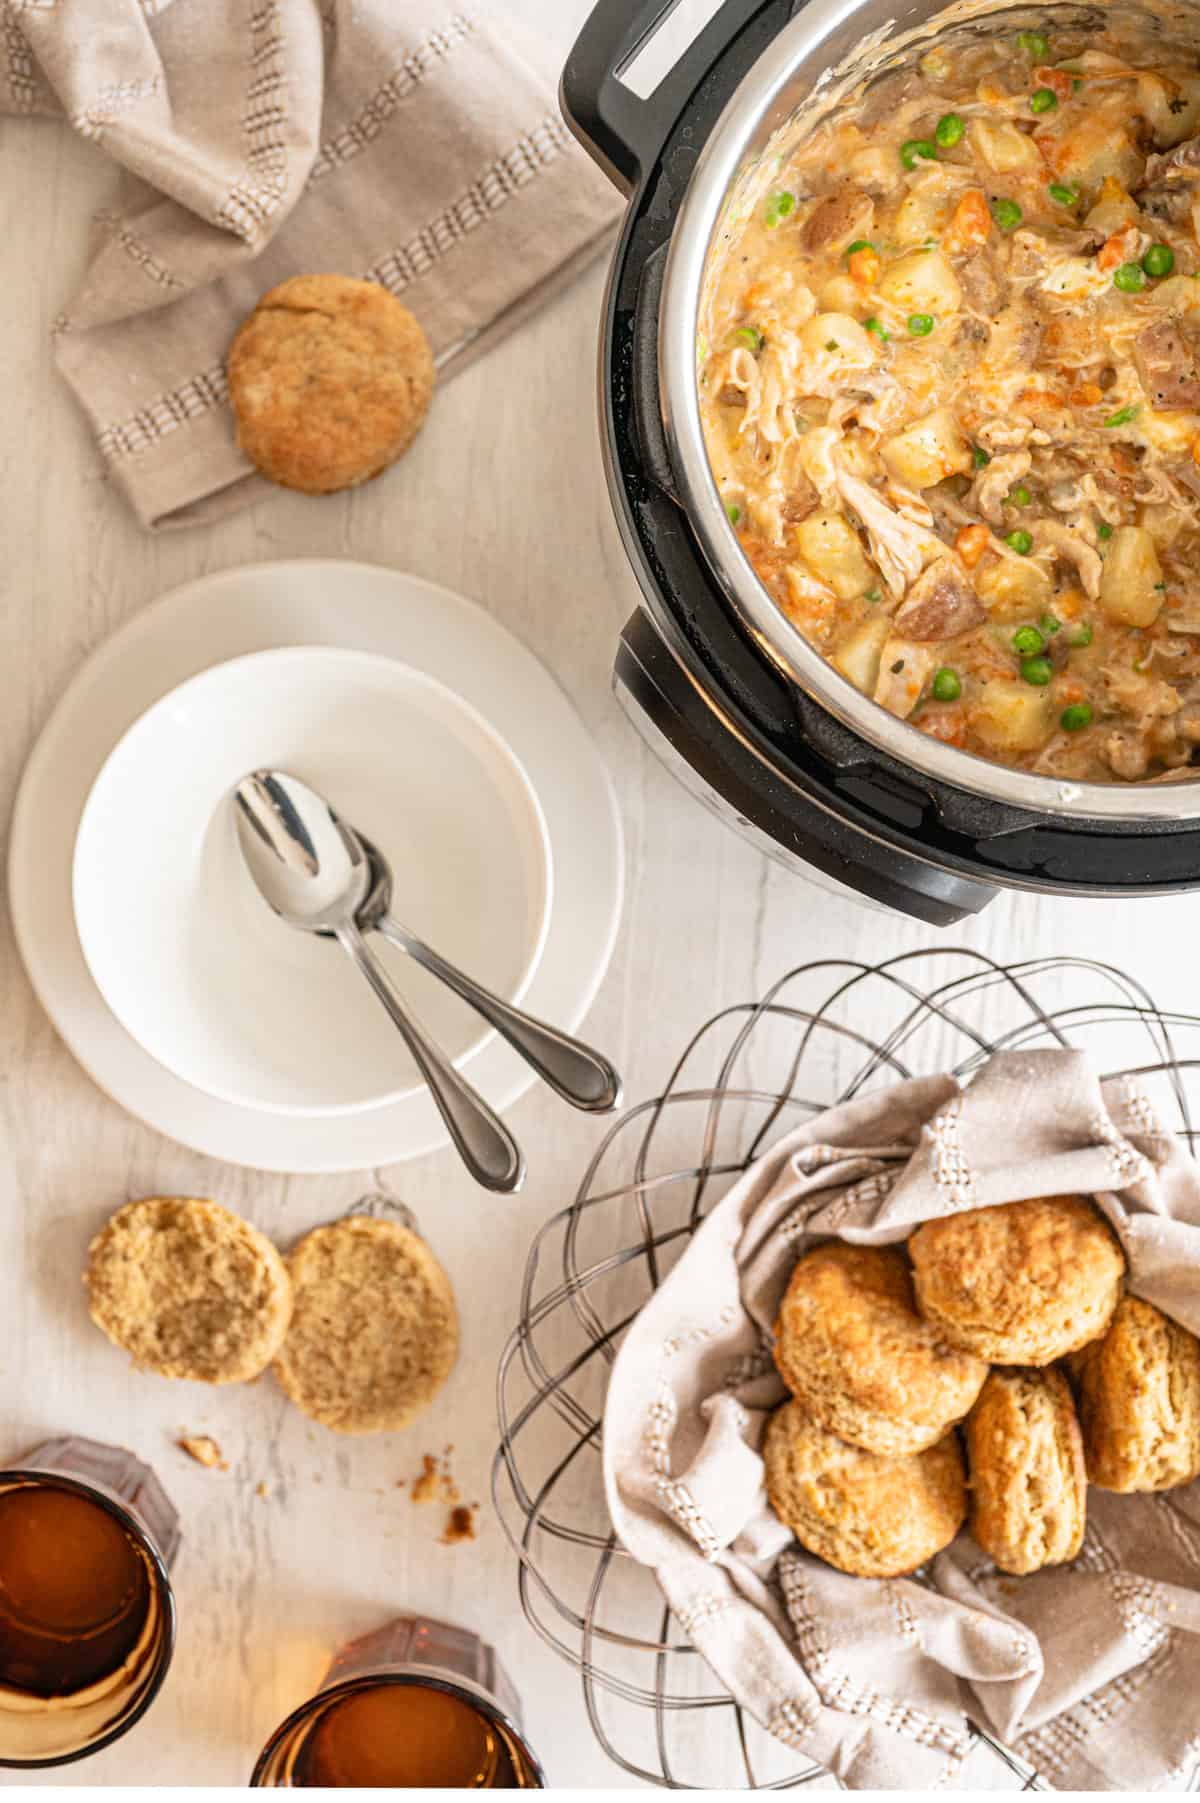 Instant Pot chicken pot pie with a basket of biscuits beside it.